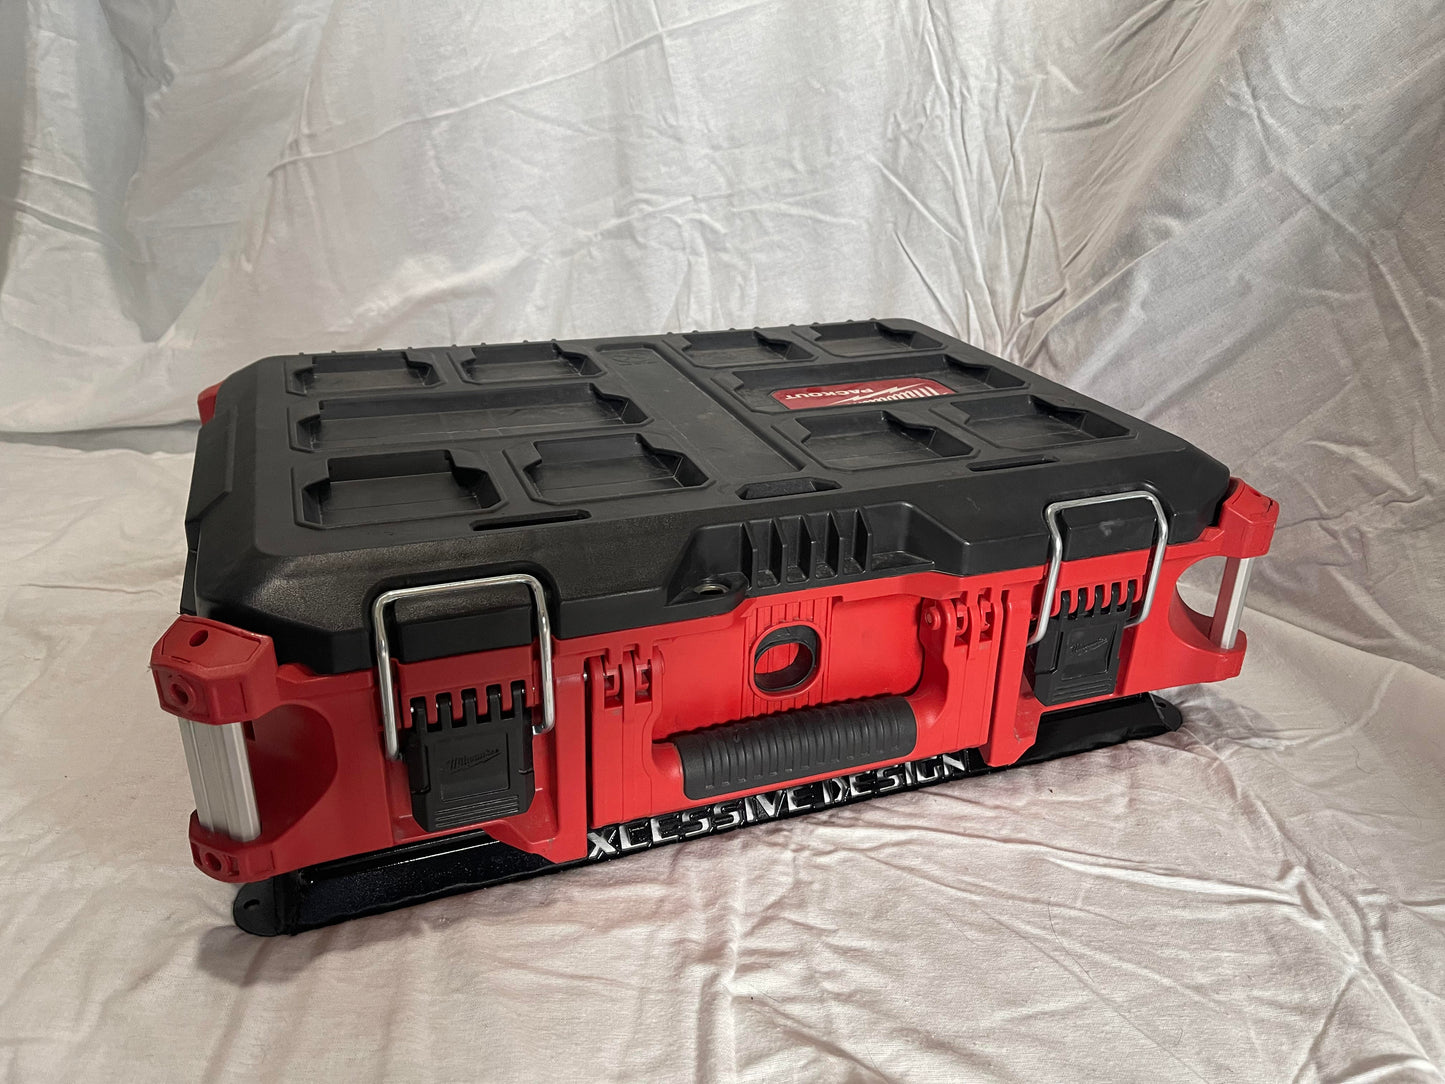 Full Bay Universal Packout Plate